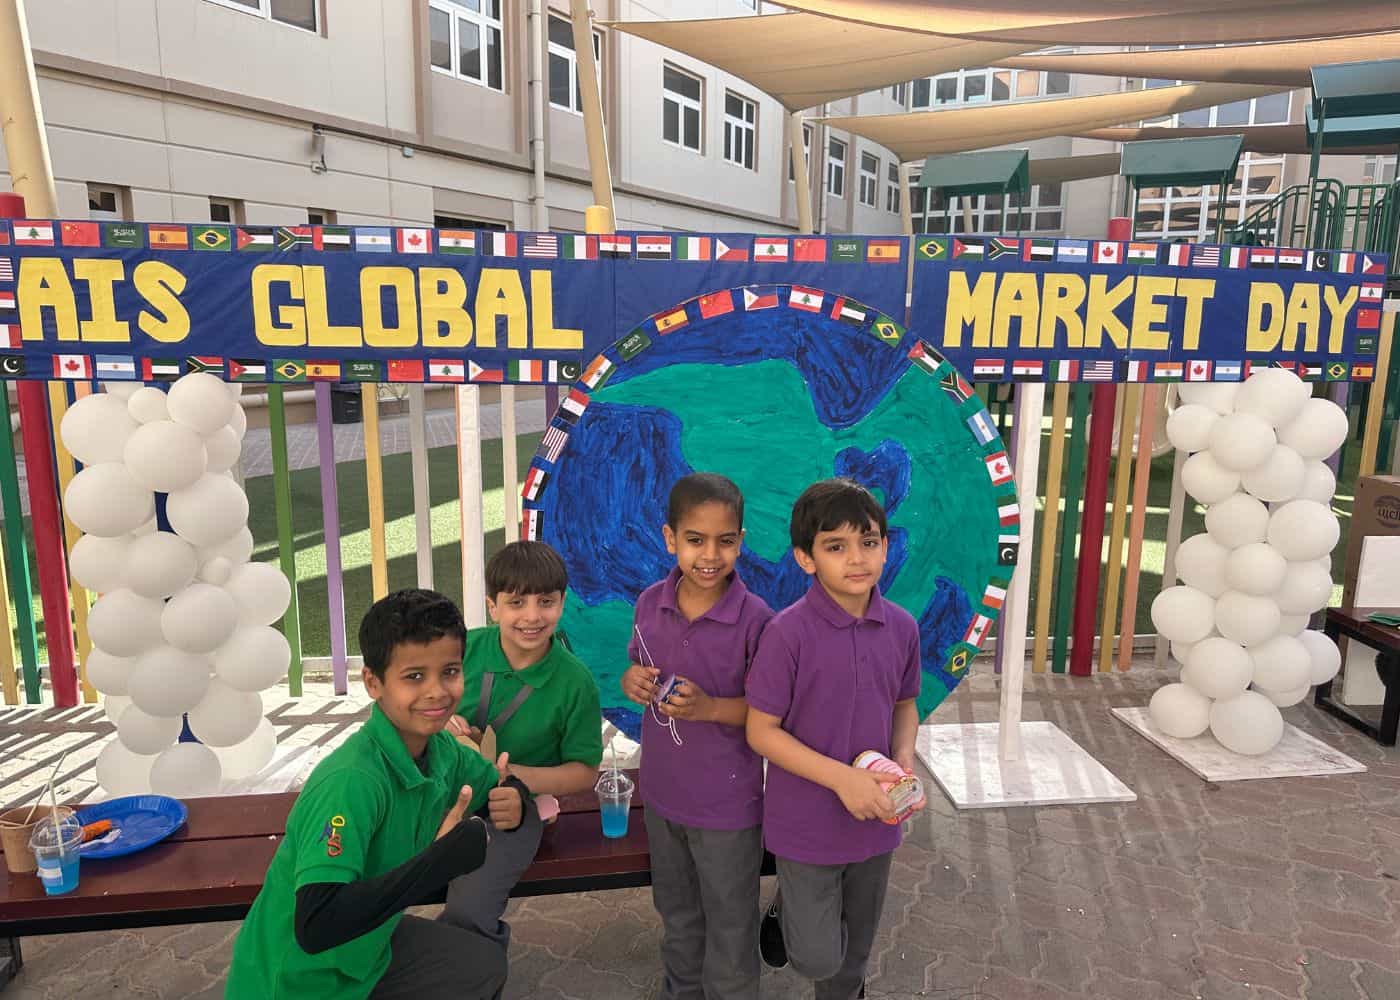 Elementary students of Abu Dhabi International School at the Global Markey Day event